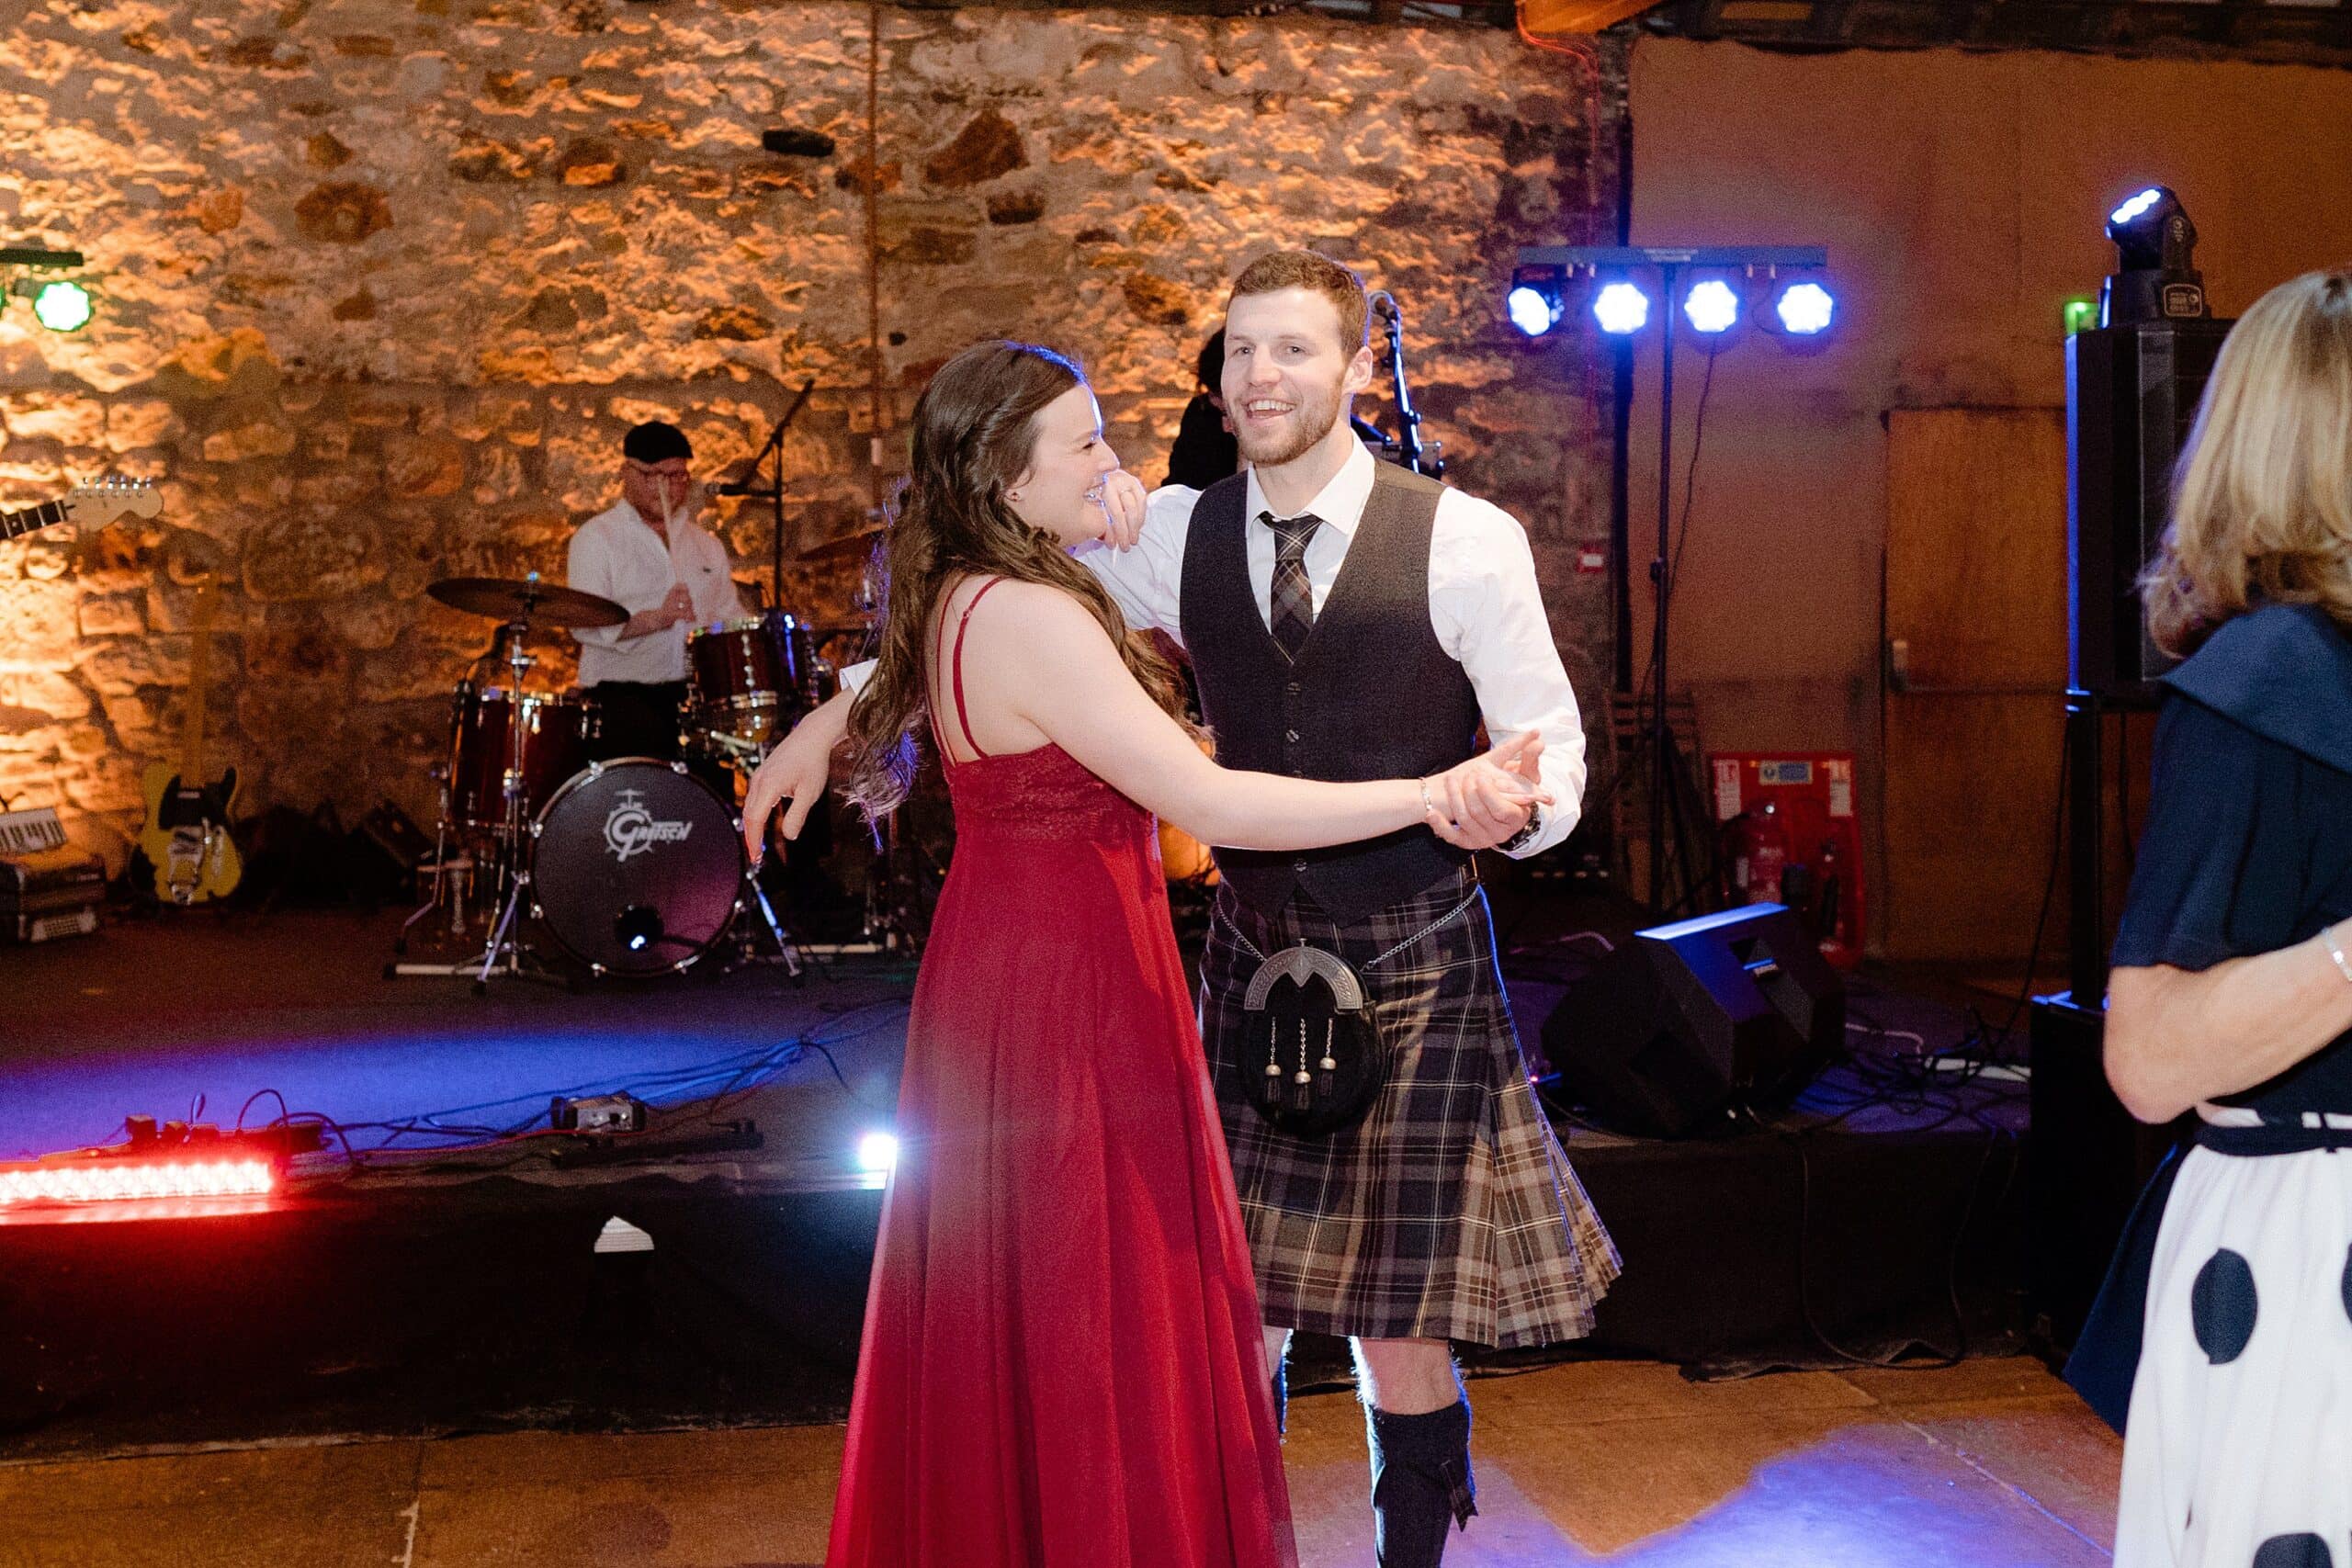 st andrews wedding photographer captures interior inside view of a unique barn wedding venue in scotland showing guests dancing in front of a band playing on a stage